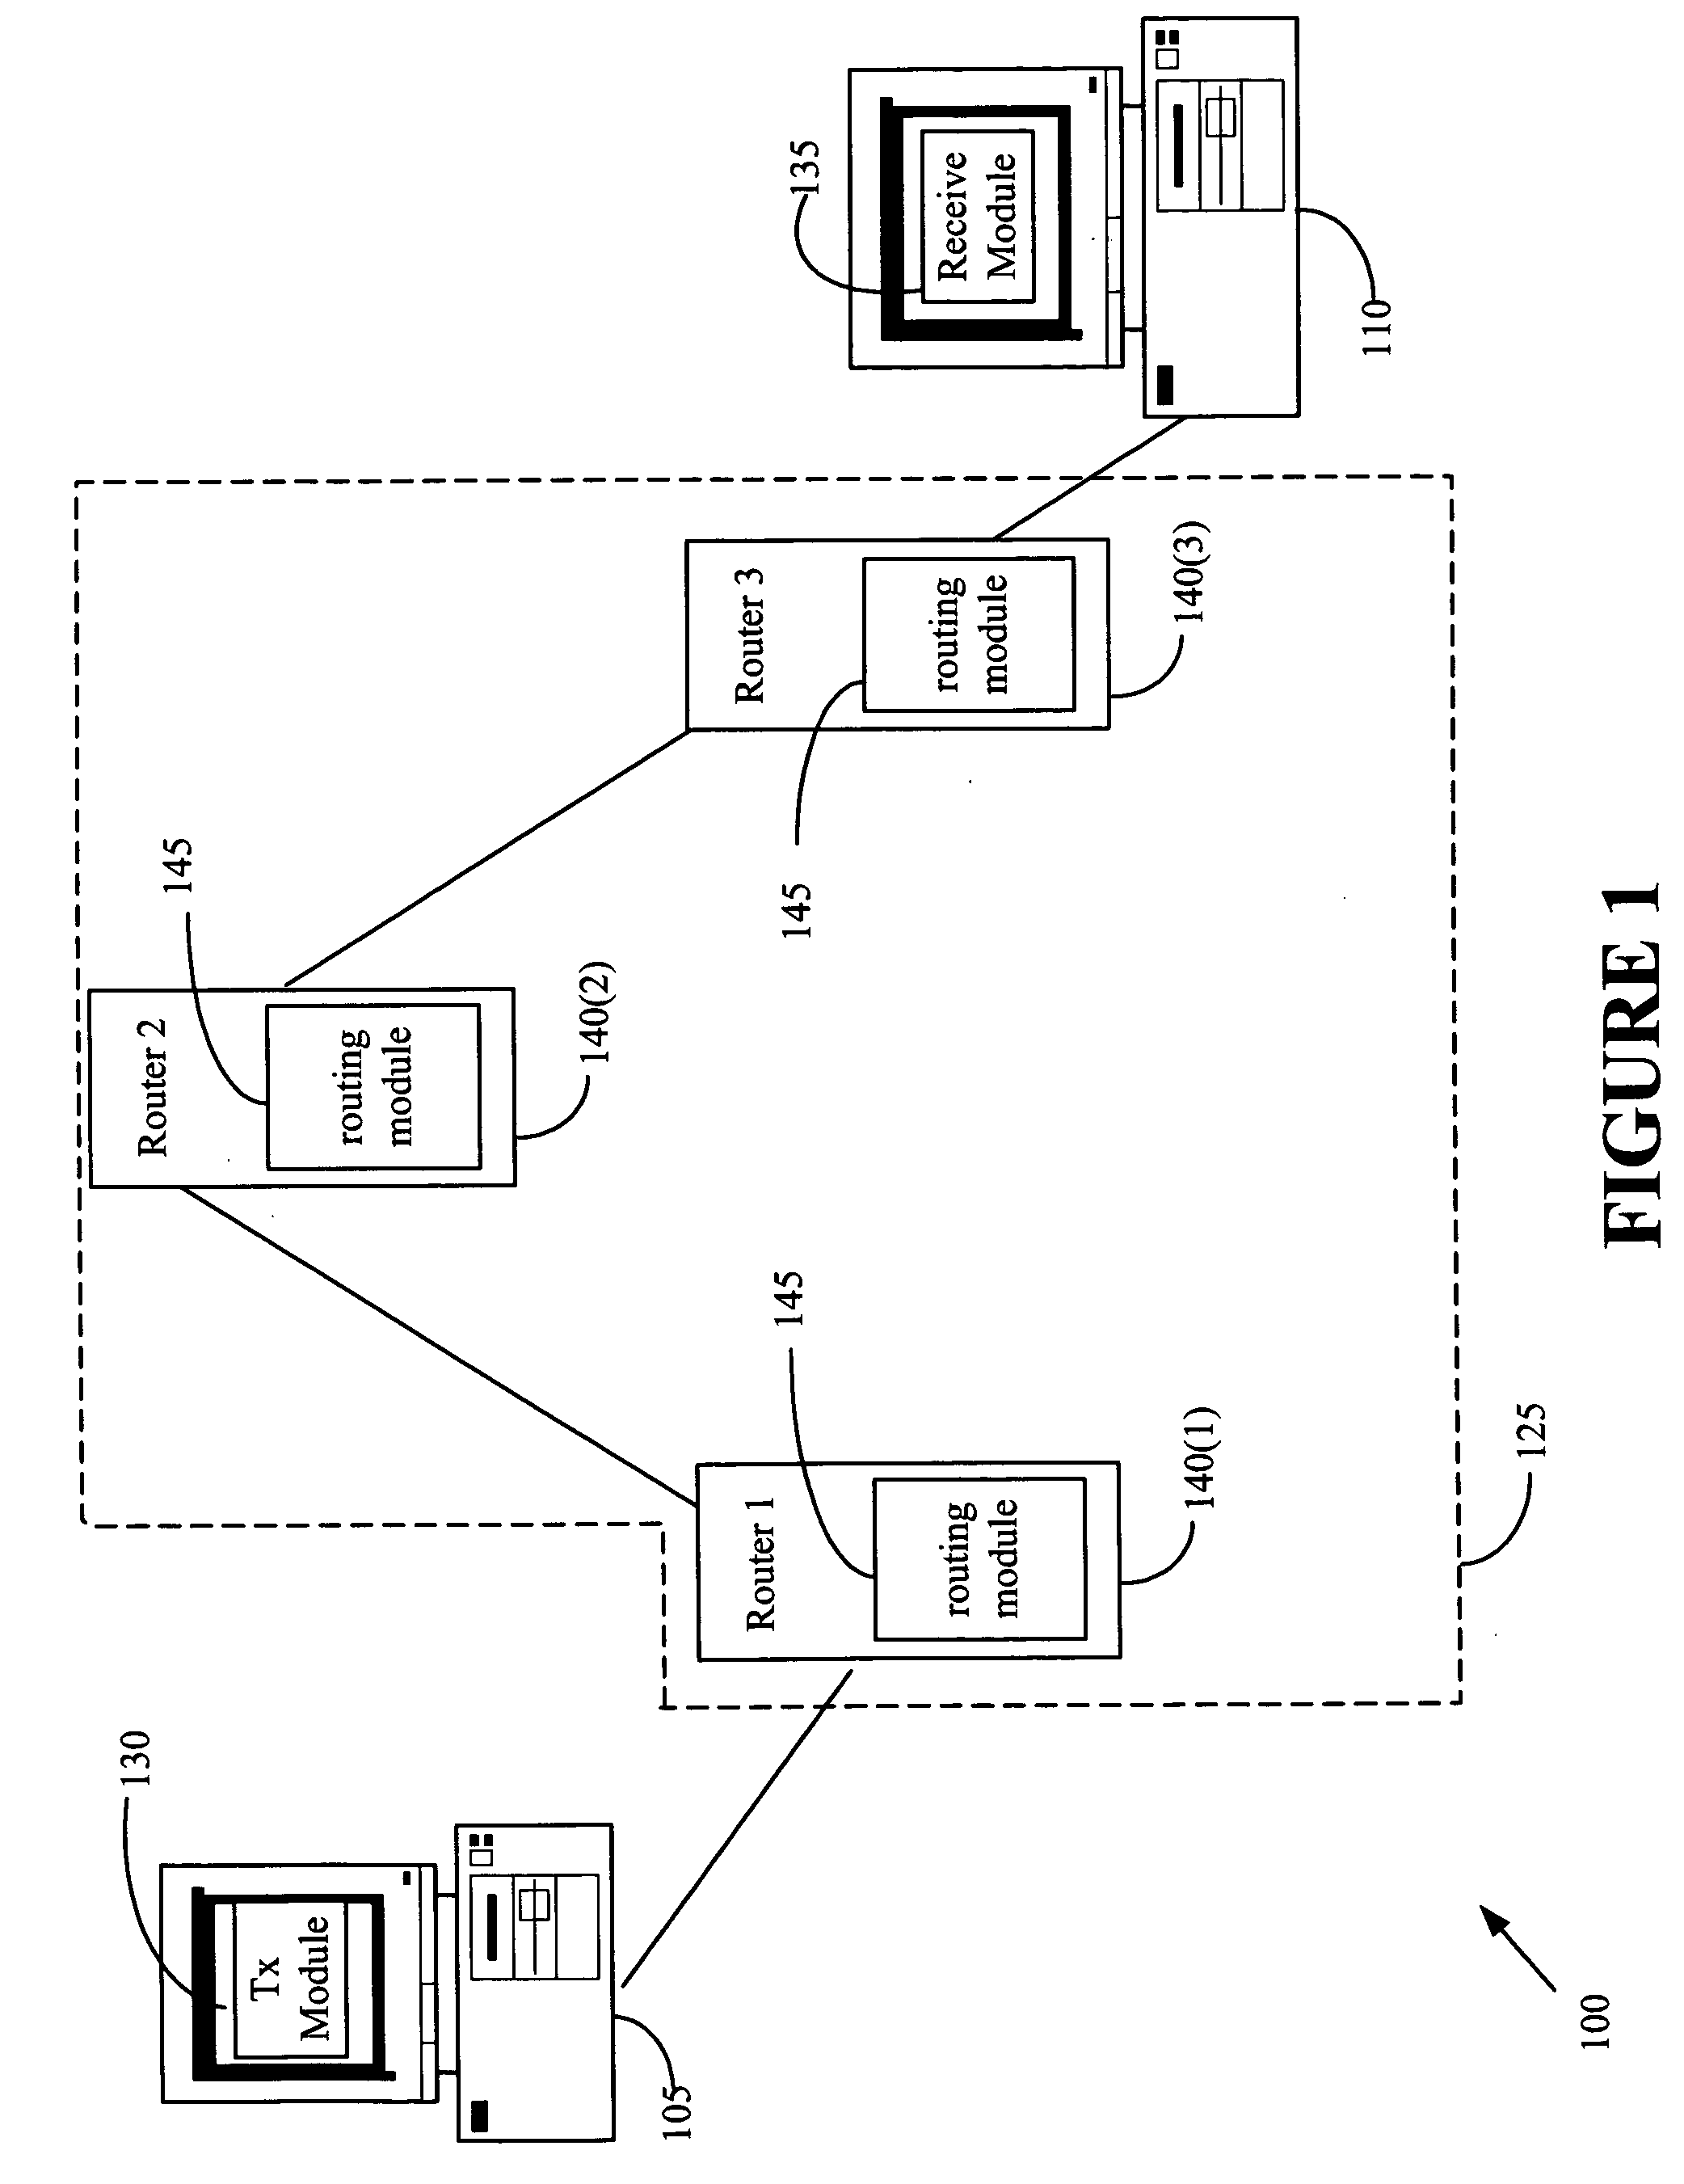 Method and apparatus for providing fragmentation at a transport level along a tranmission path